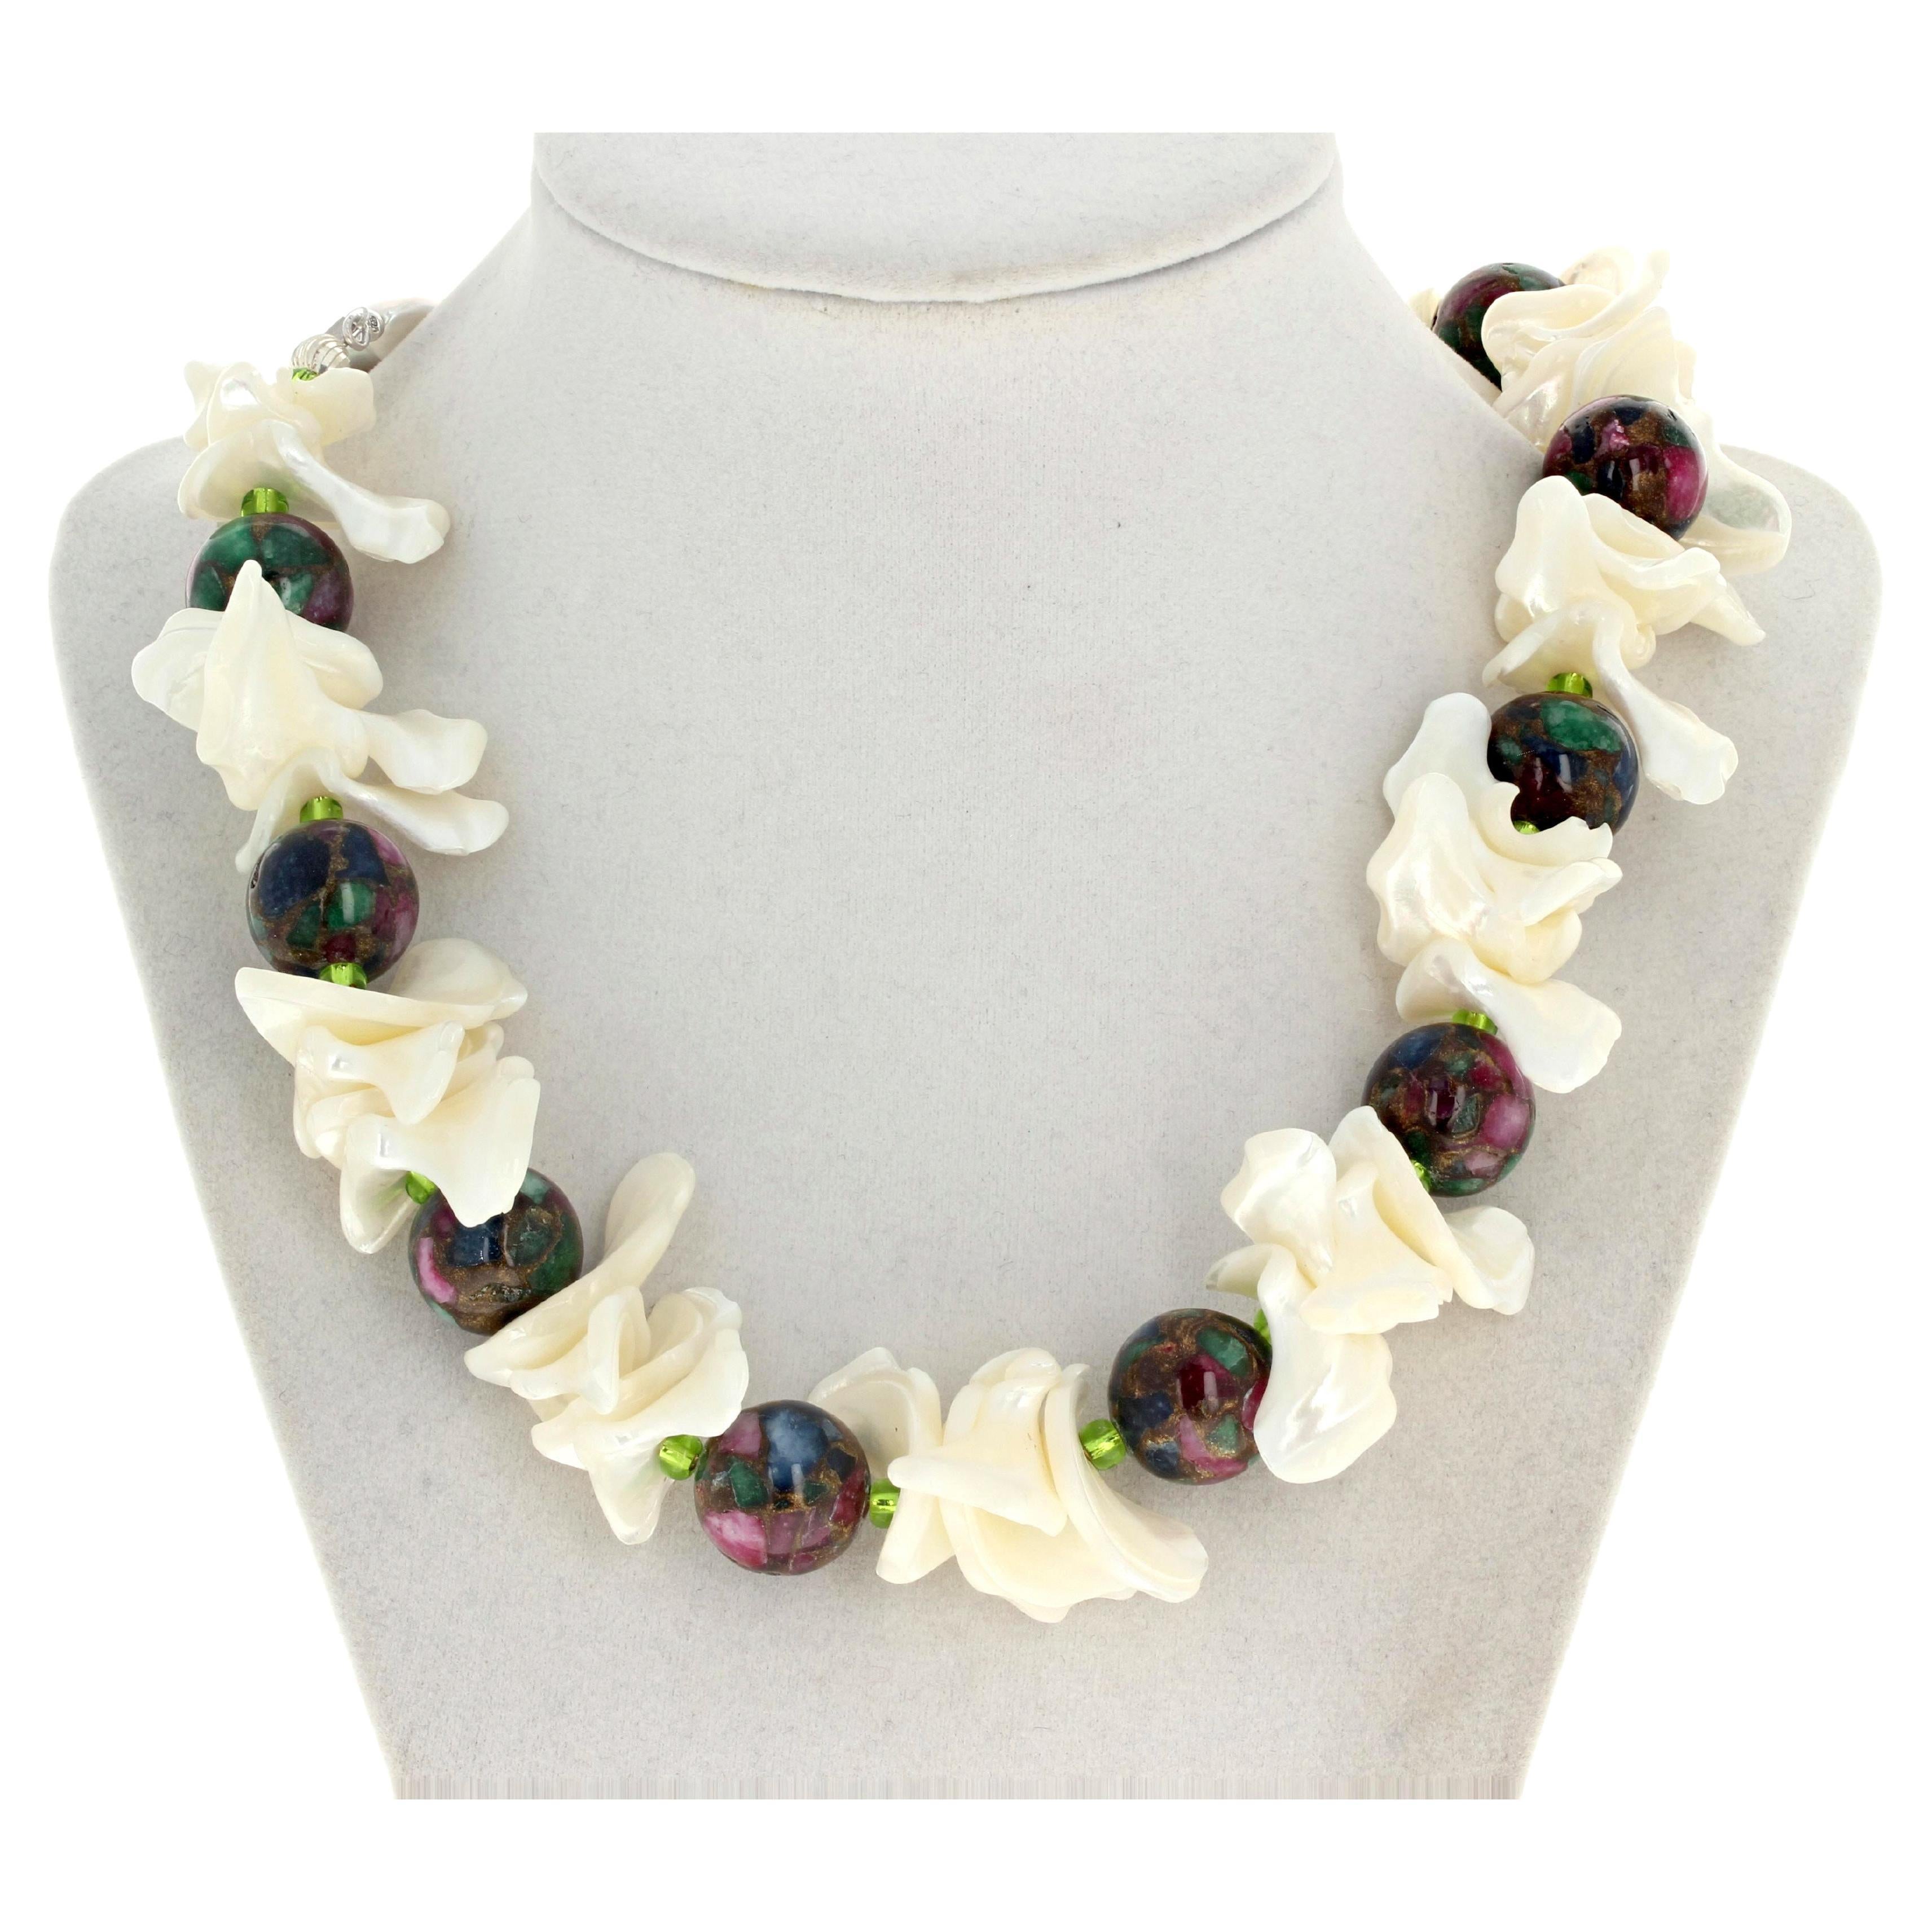 This multi-color natural Ruby Zoisite glows magnificently between these beautiful highly polished (no sharp edges) white Pearl shells in this 19 inch long necklace.  The Ruby Zoisites are approximately 18mm.  The clasp is a silver easy to use hook